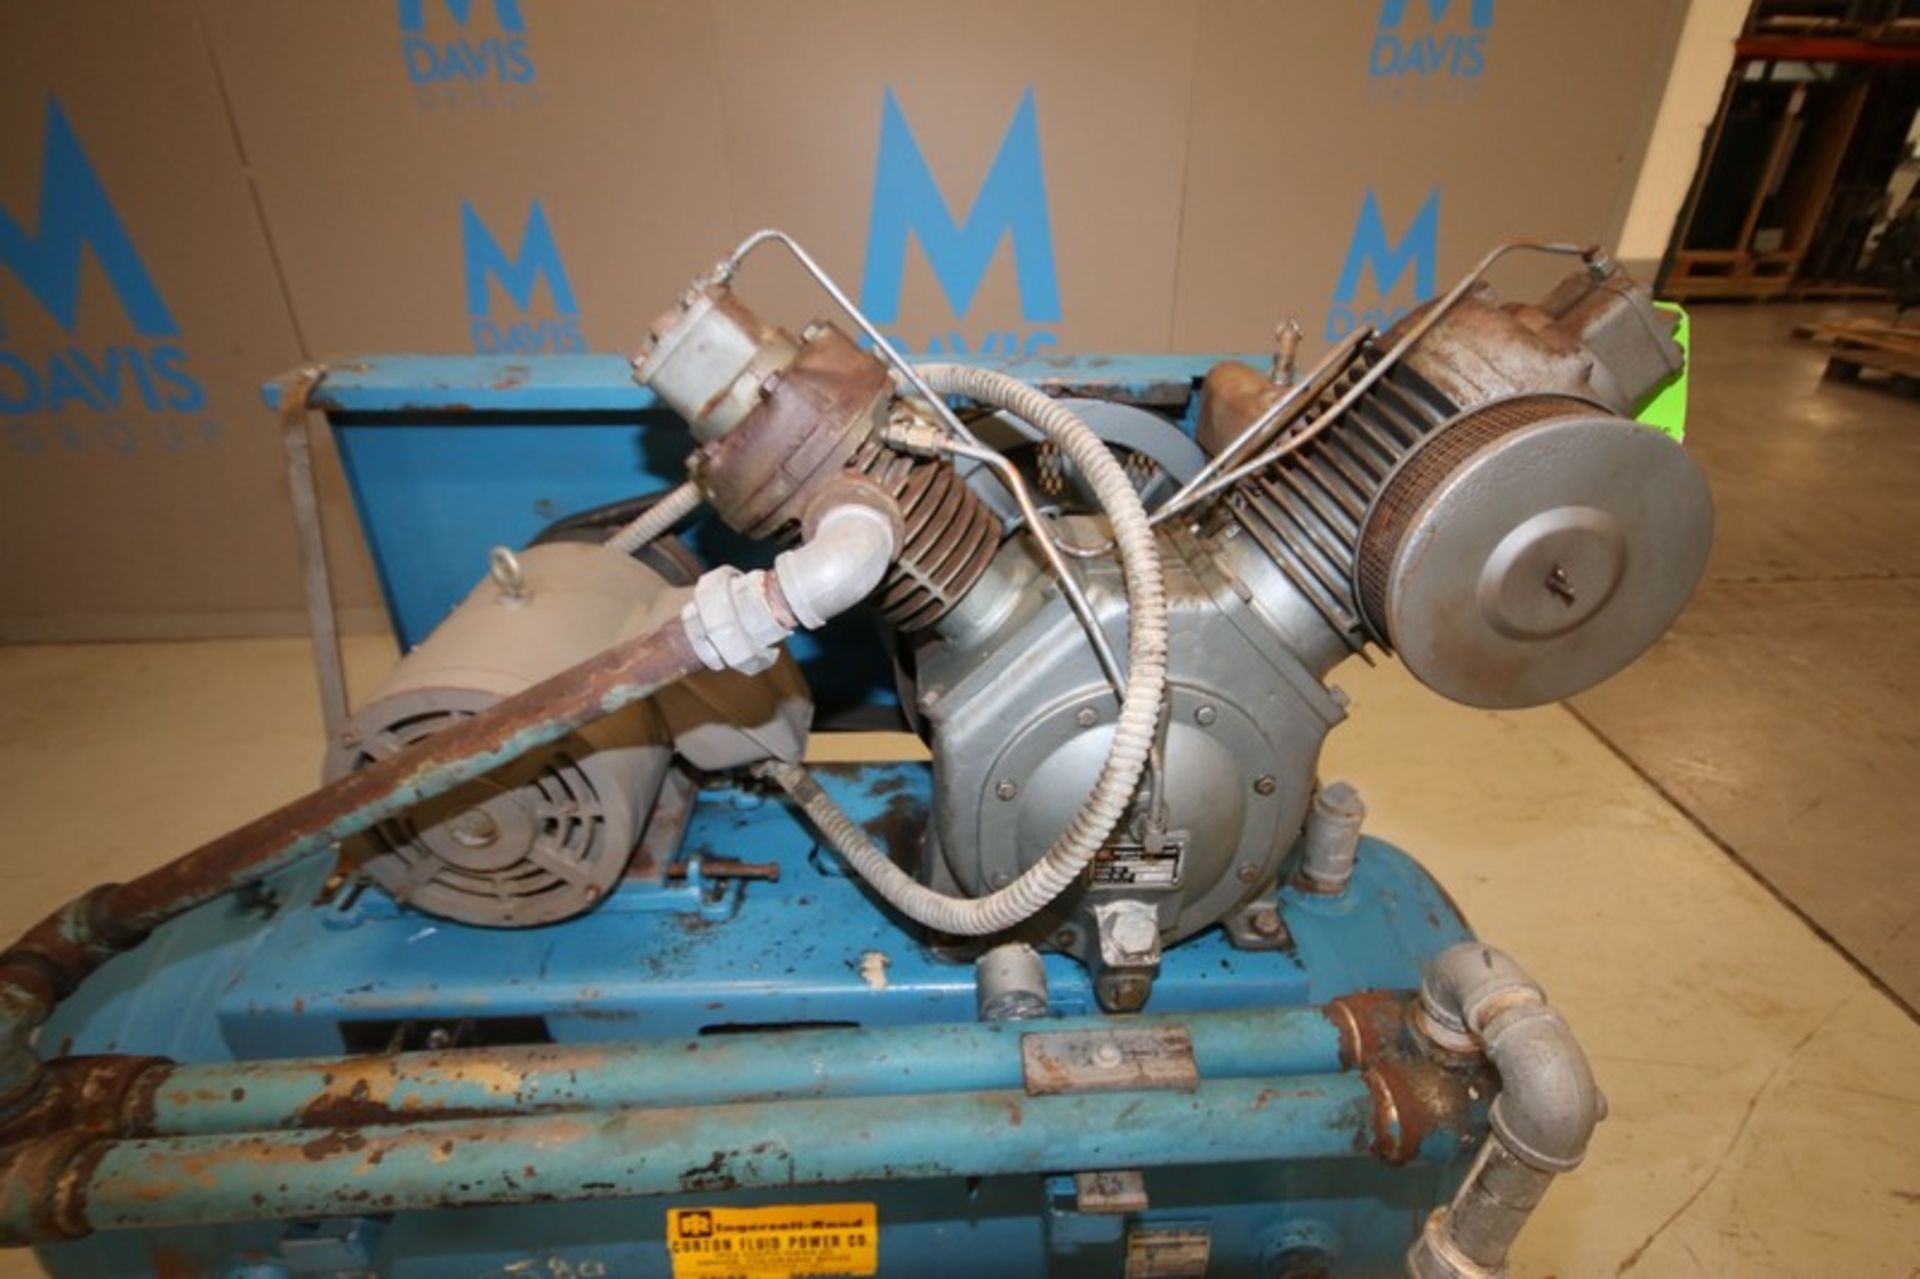 Ingersoll Rand 10 hp Reciprocating Air Compressor,Model 71T4, SN 276537, 1740 rpm, 230/460V, Mounted - Image 4 of 7